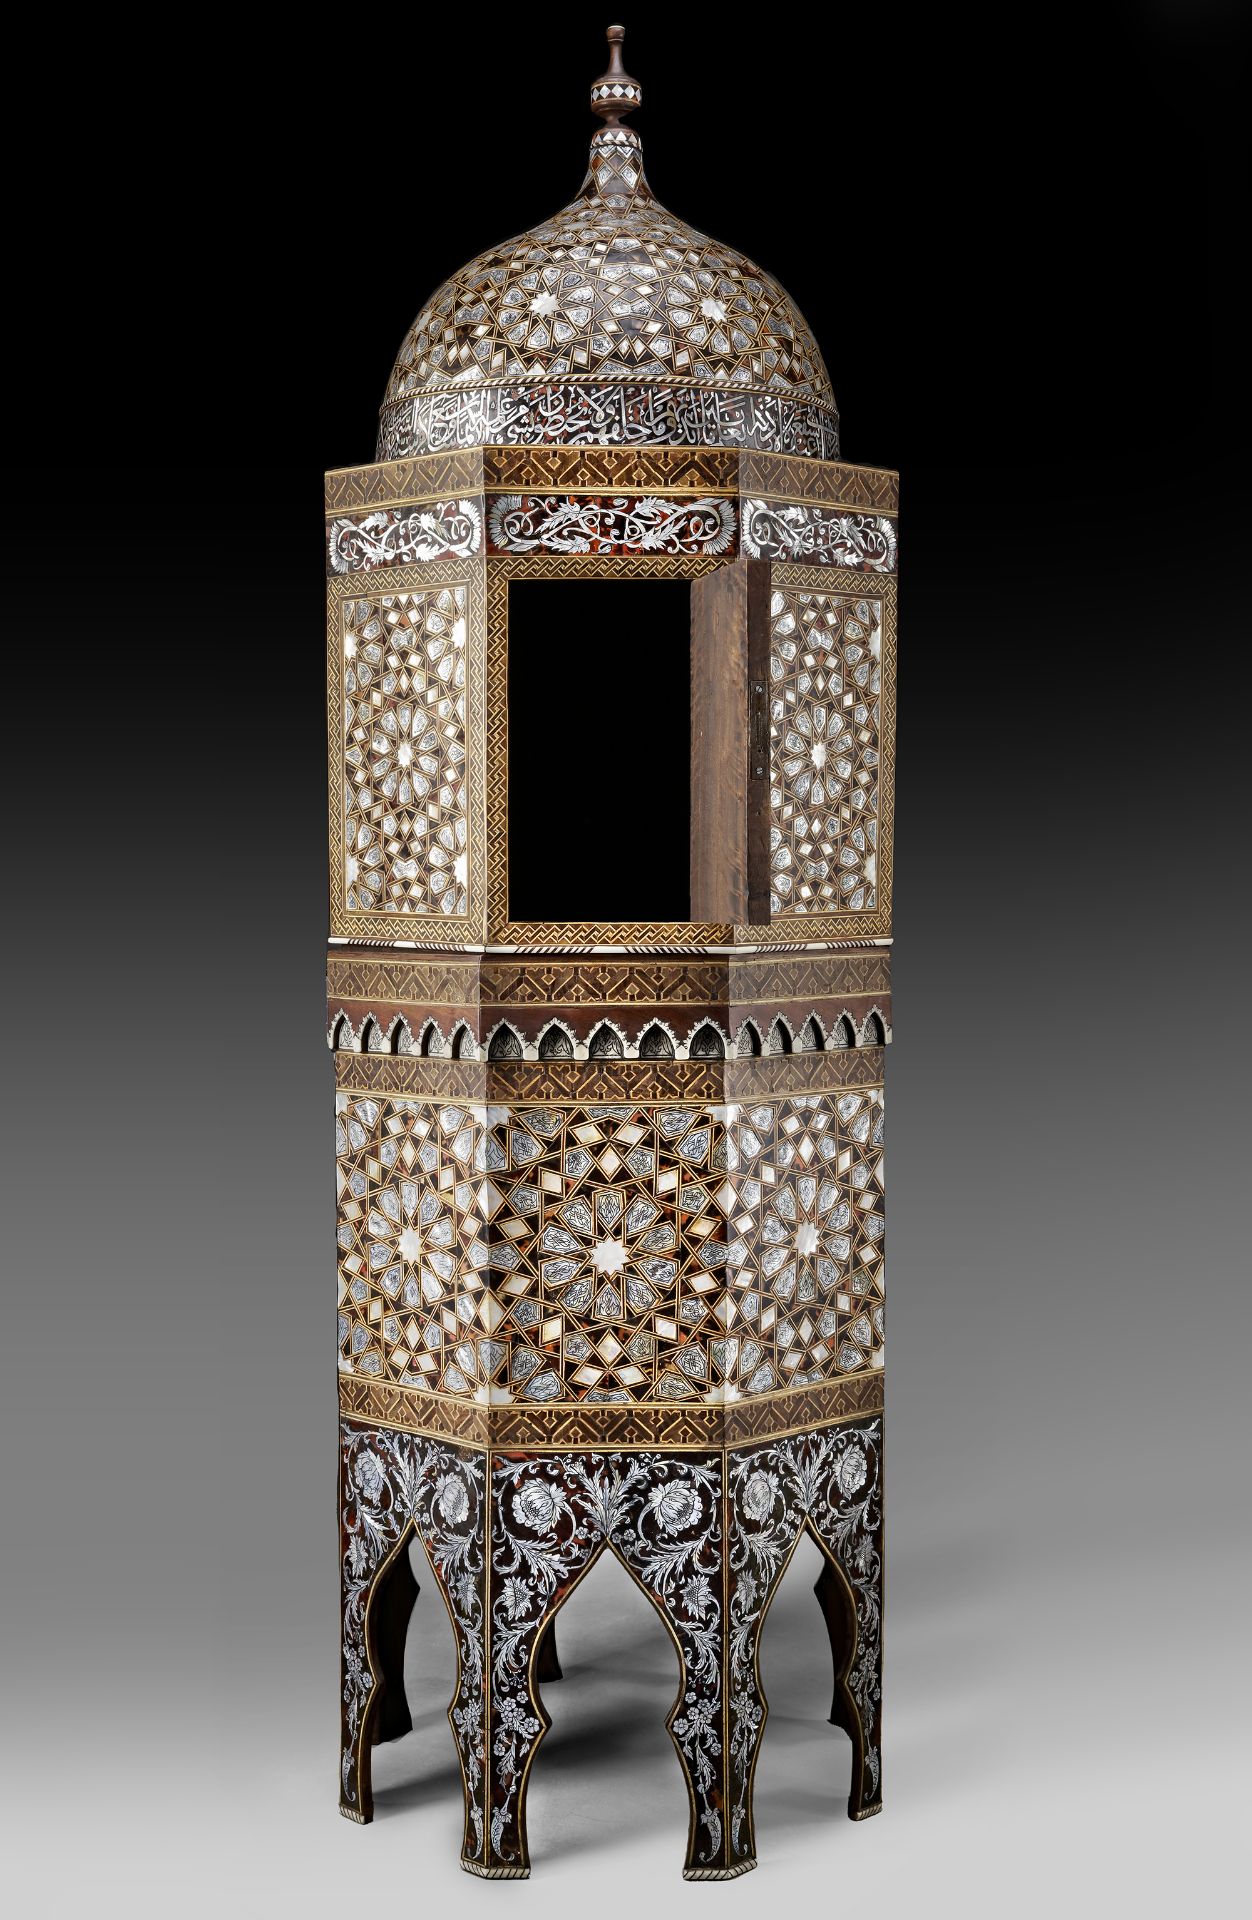 A TORTOISESHELL AND MOTHER-OF-PEARL OCTAGONAL CABINET, TURKEY OR SYRIA, EARLY 20TH CENTURY - Image 5 of 10